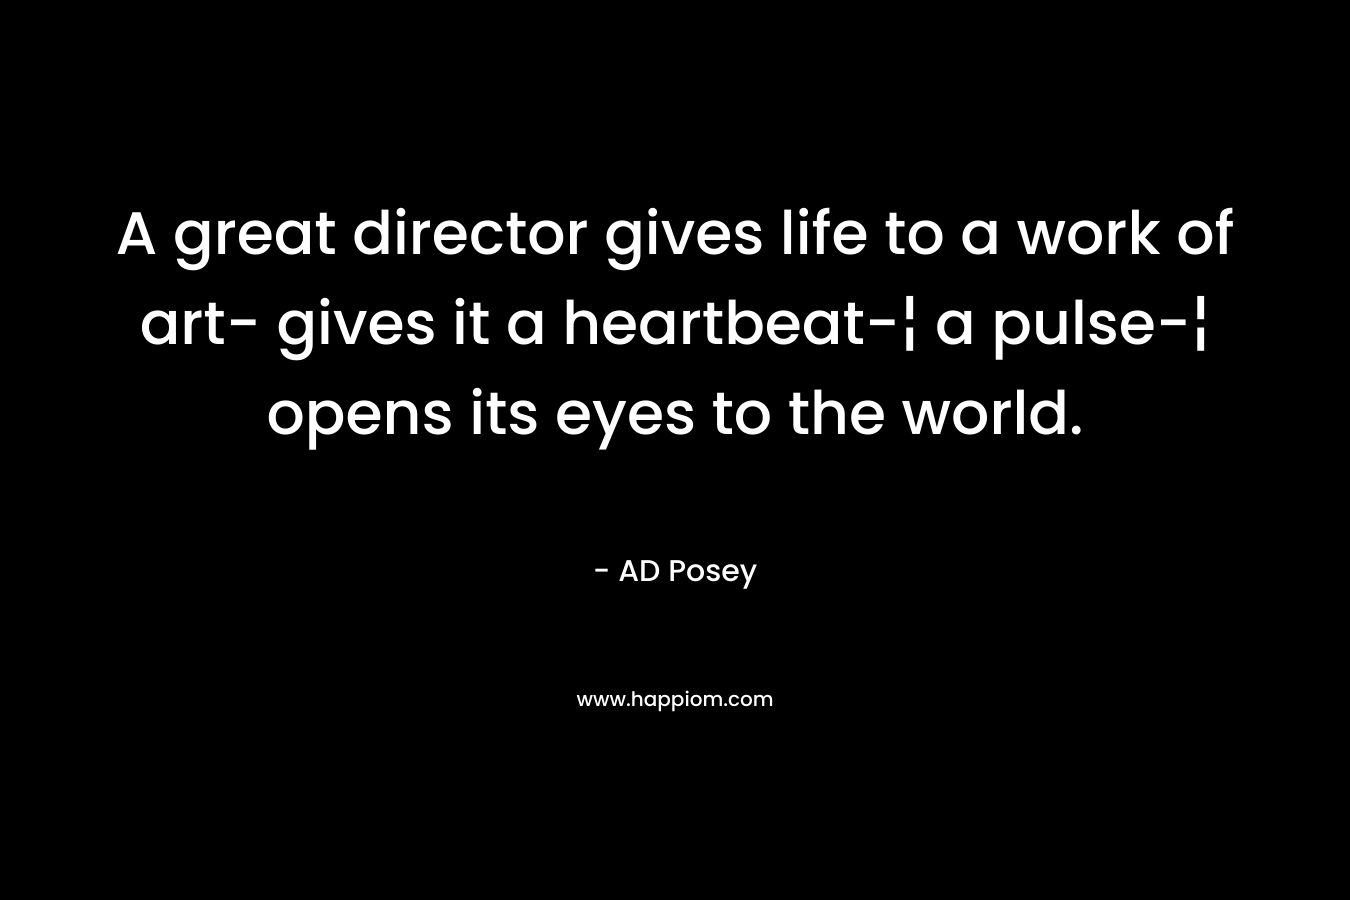 A great director gives life to a work of art- gives it a heartbeat-¦ a pulse-¦ opens its eyes to the world.